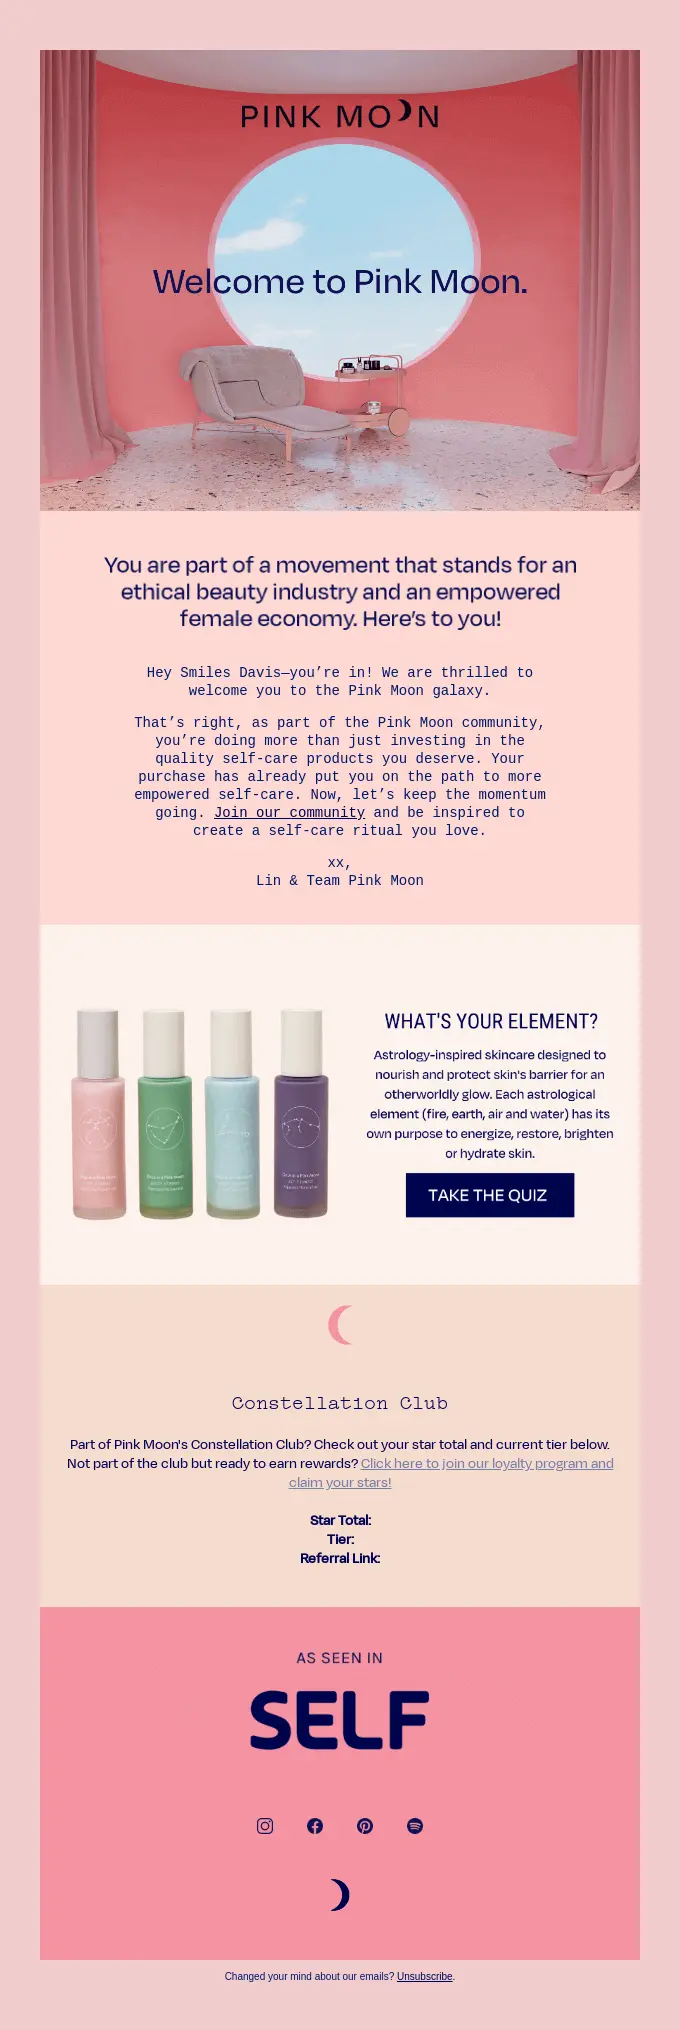 Image shows a welcome email from Pink Moon that includes two content-focused CTAs: one that encourages readers to “Join our community,” and another that encourages them to “Take the quiz” to determine which astrology-inspired skincare product is best for them.